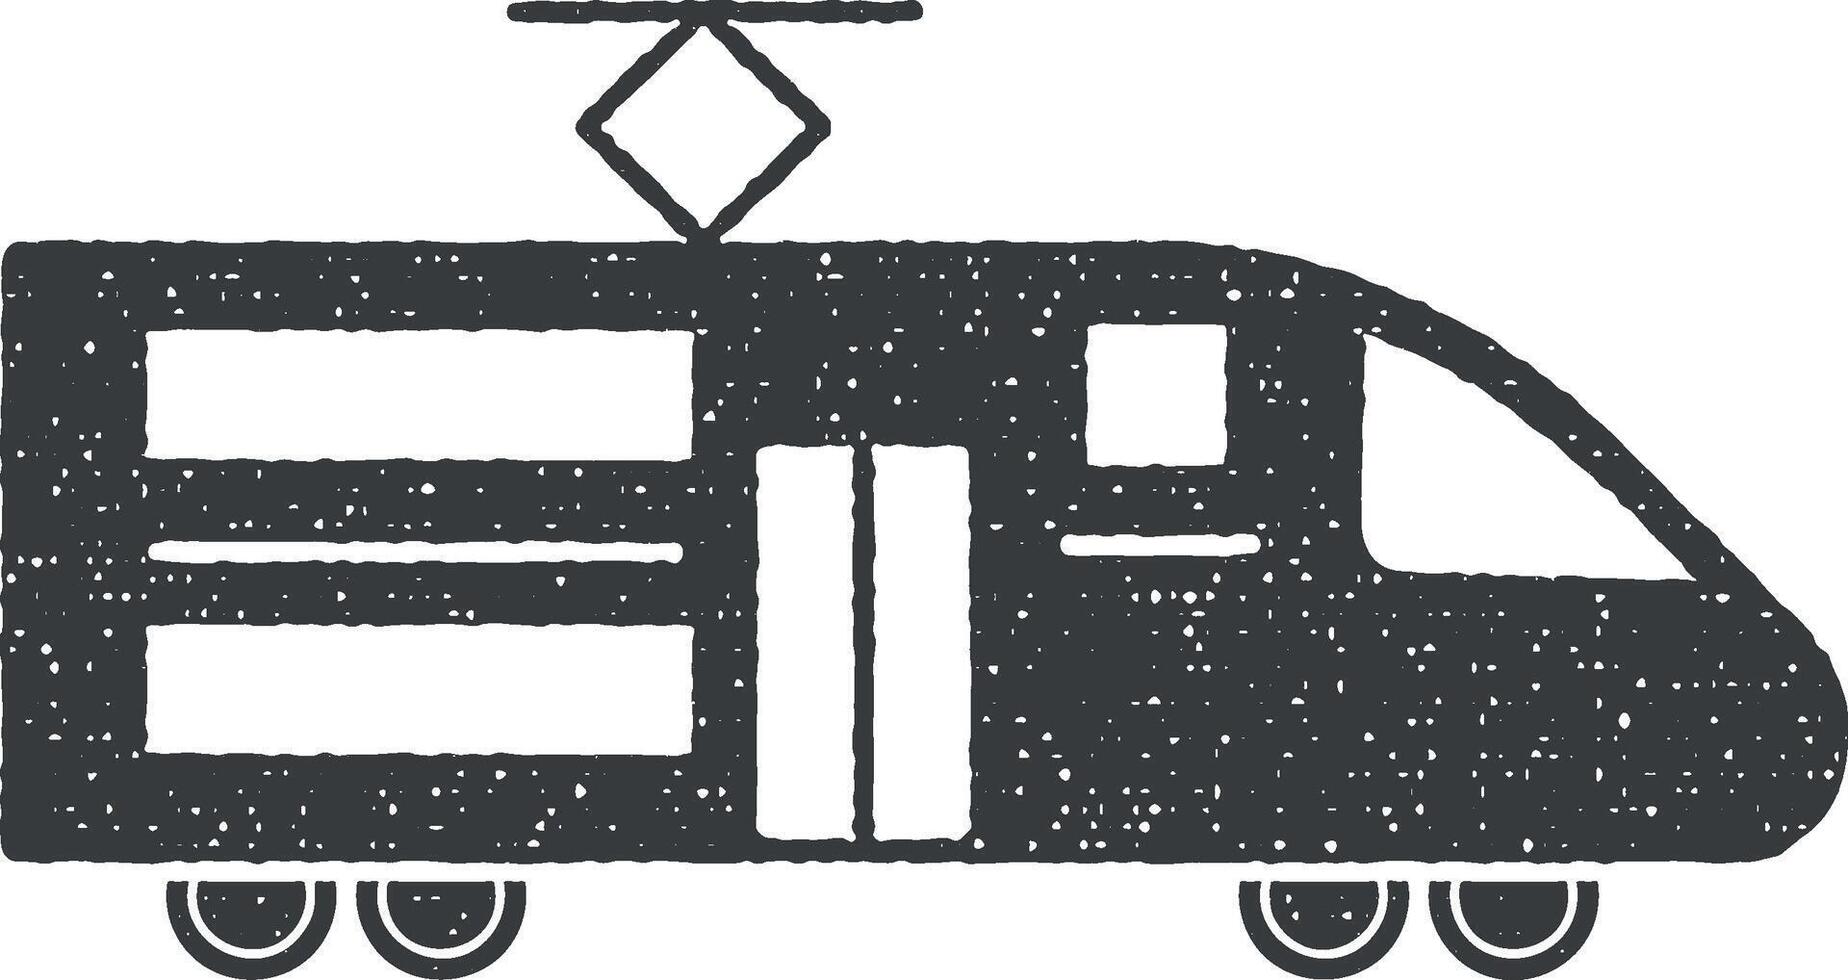 Bullet train vector icon illustration with stamp effect